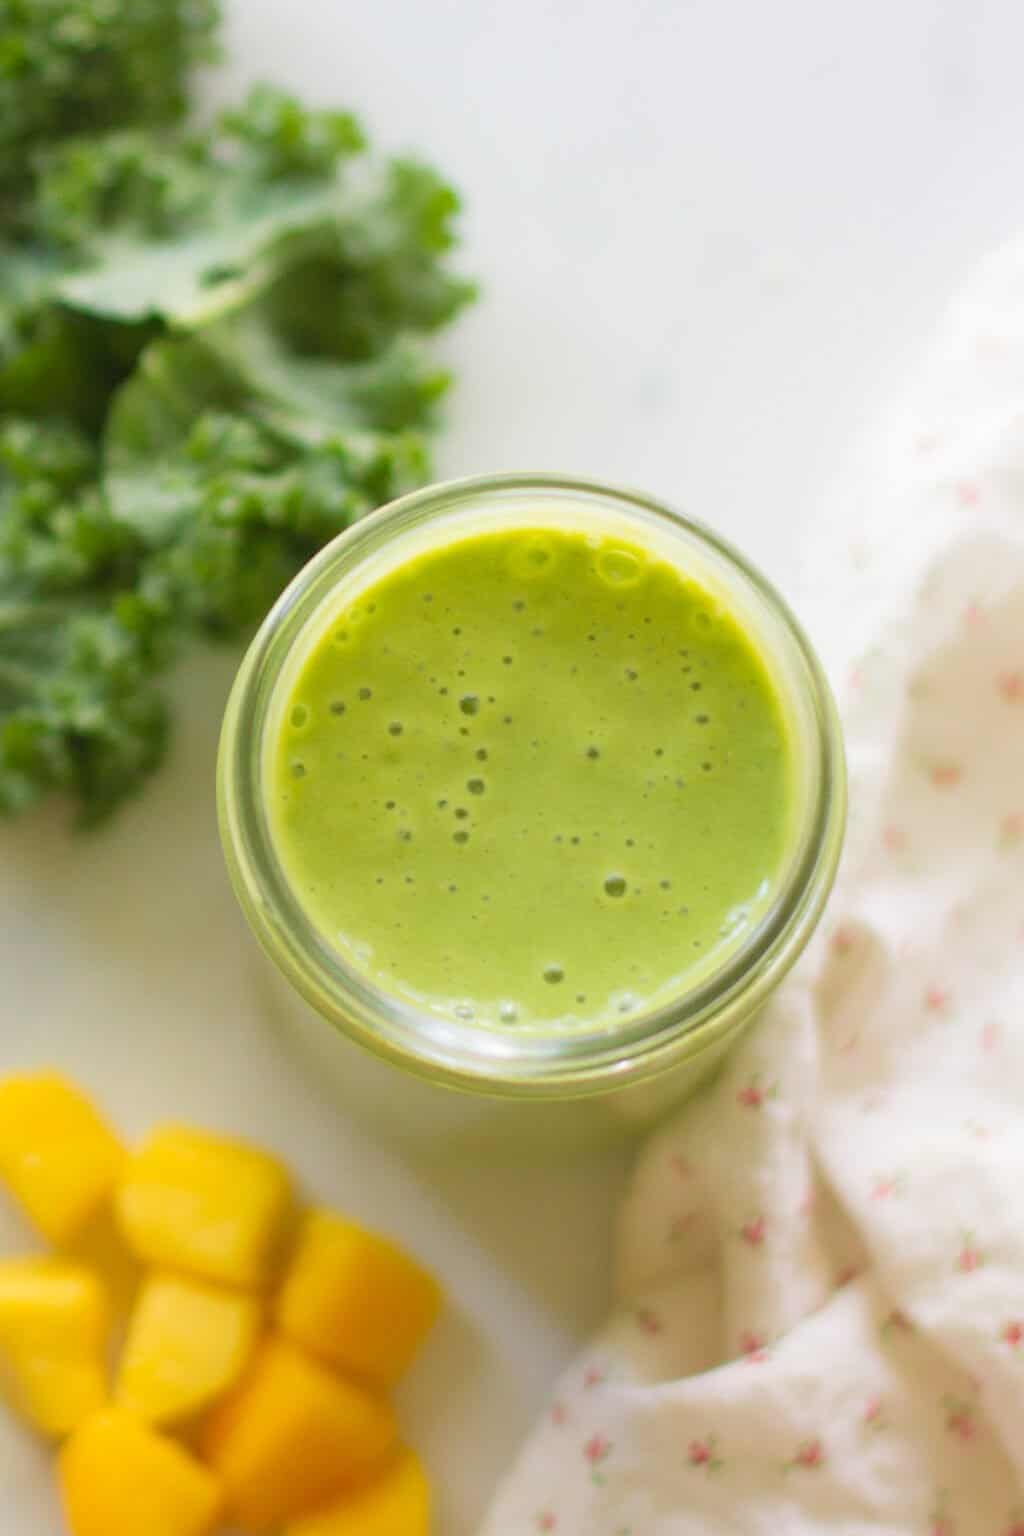 Less Thick Smoothie Recipes - Kale Smoothie that's Kid Approved